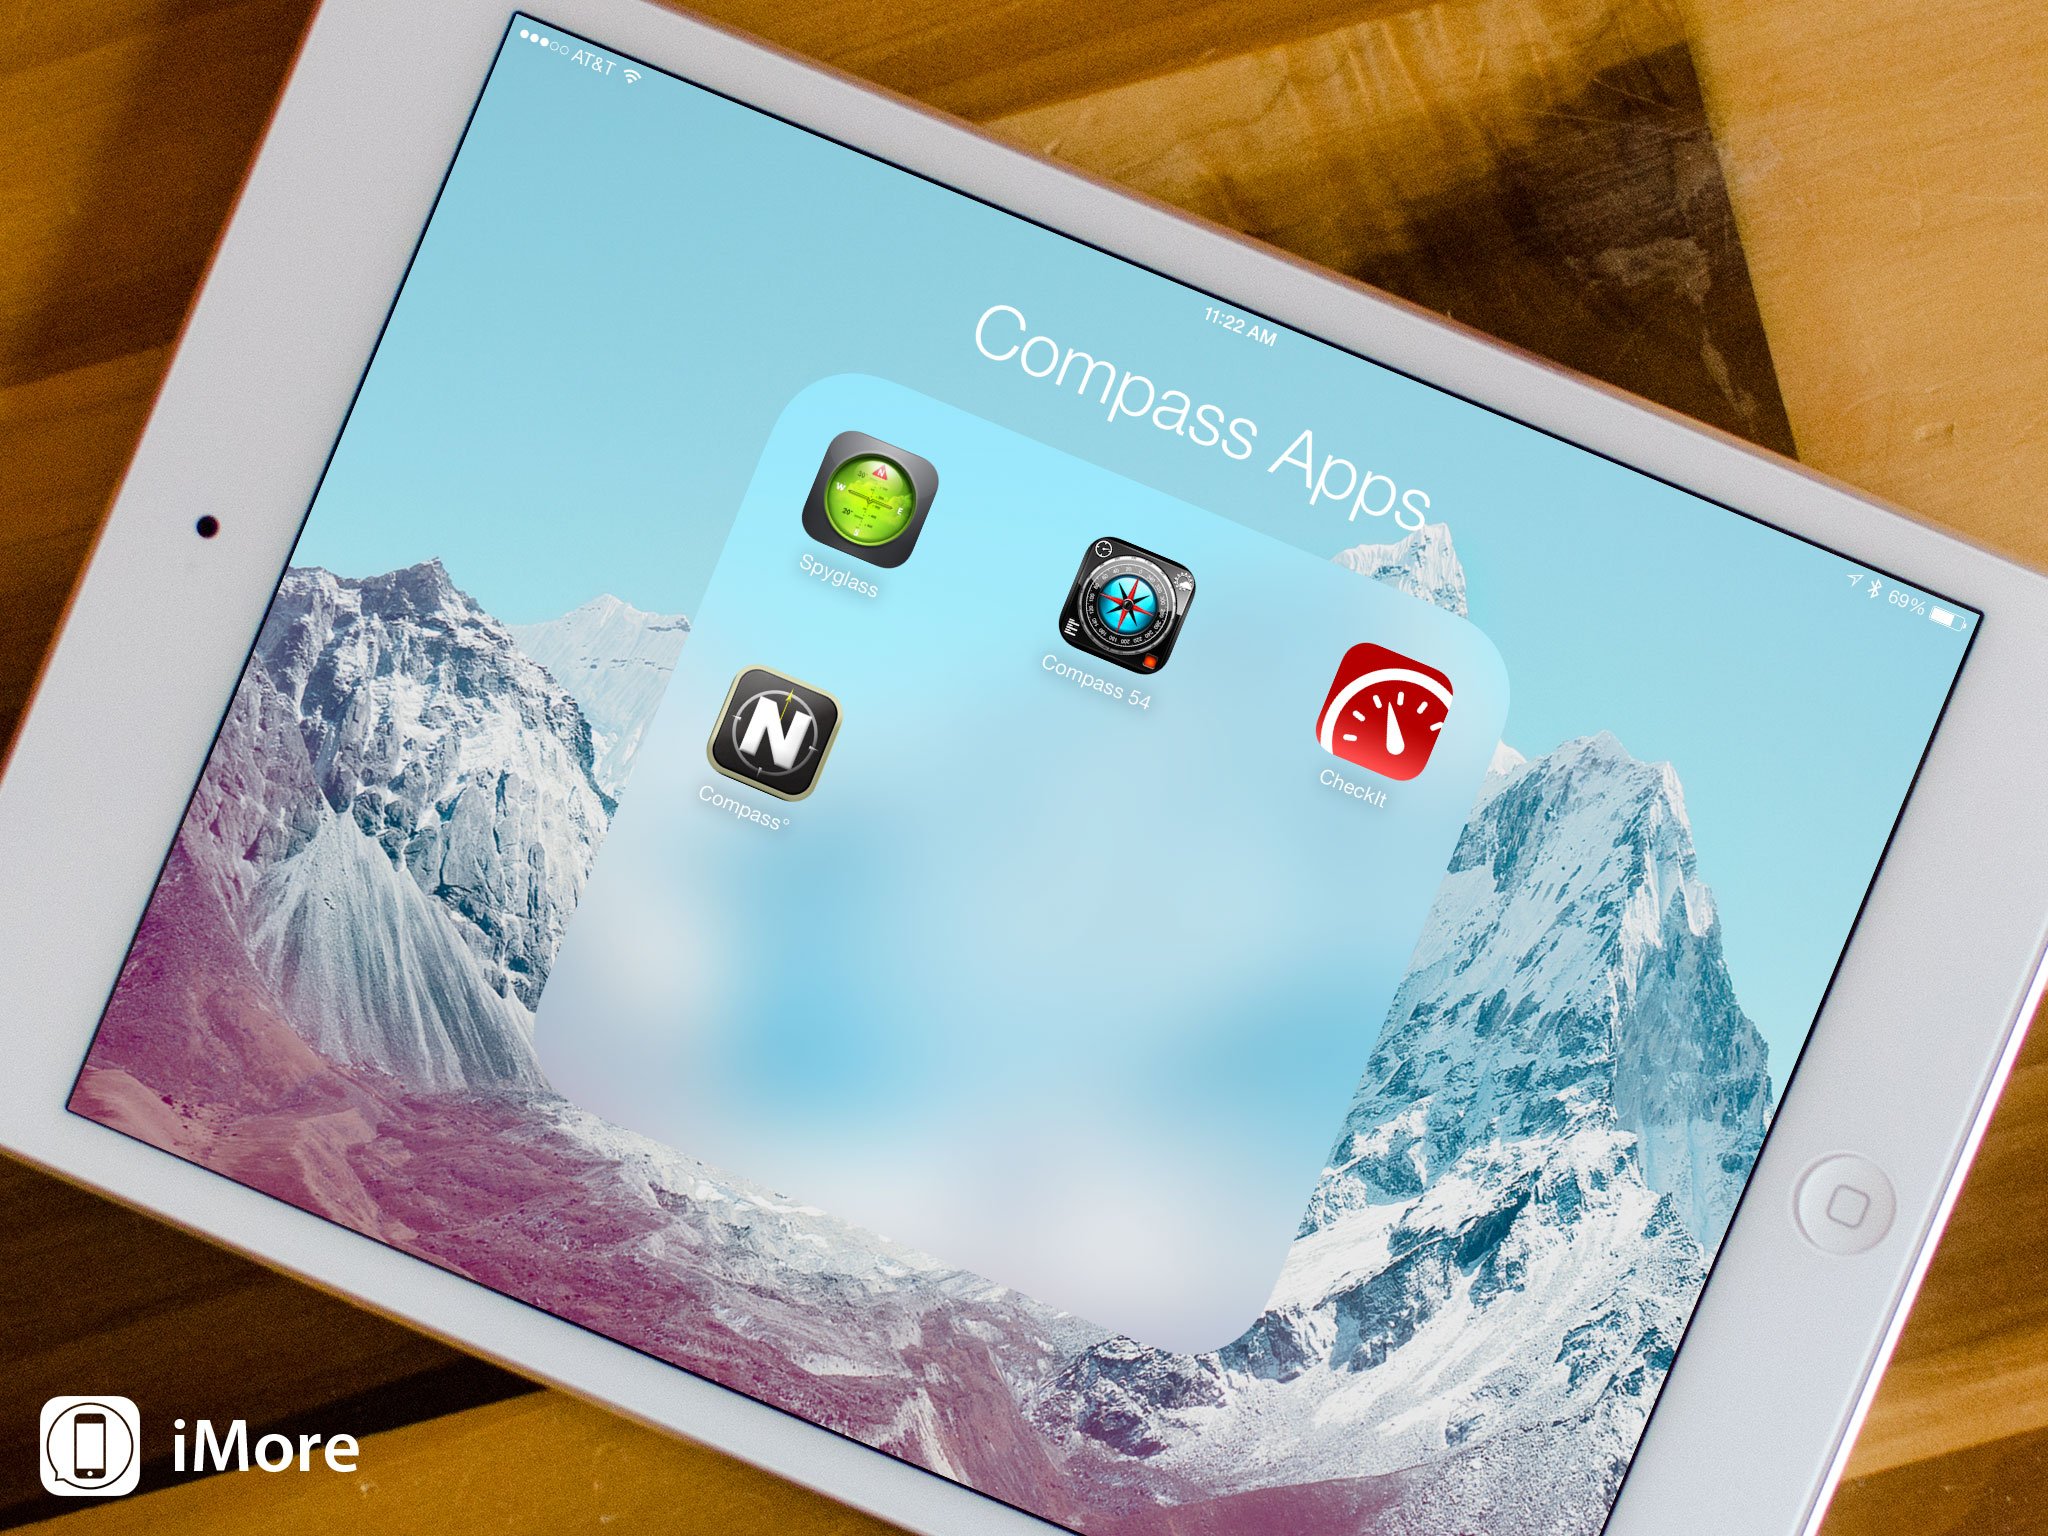 Best compass apps for iPad: Spyglass, CheckIt, Compass 54, and more!